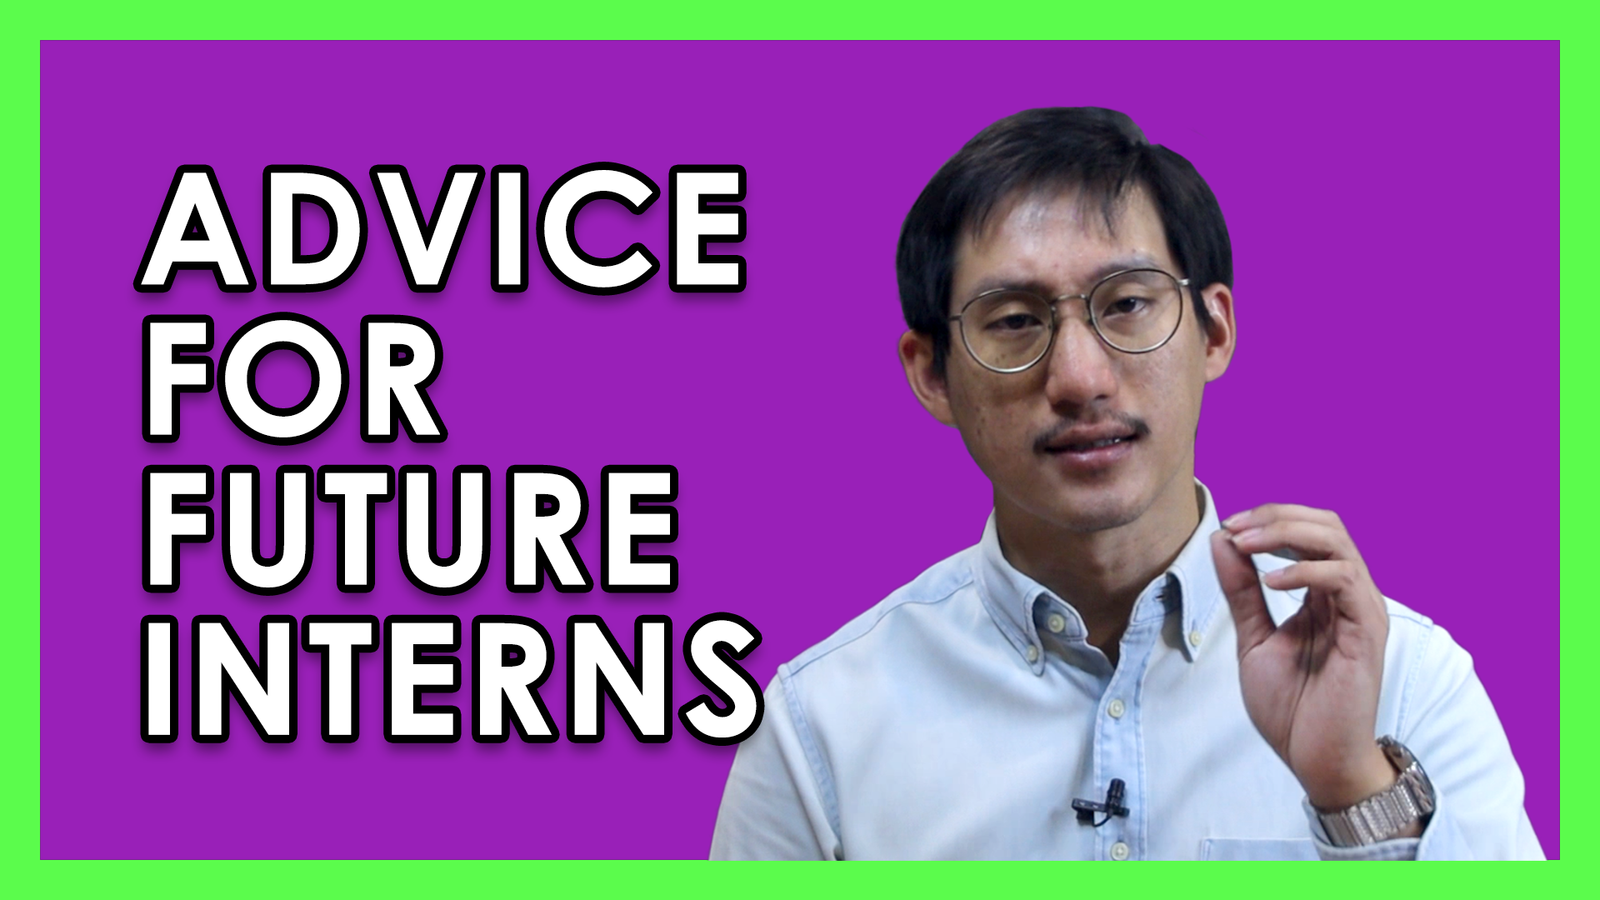 3 Pieces of Advice for Future Interns